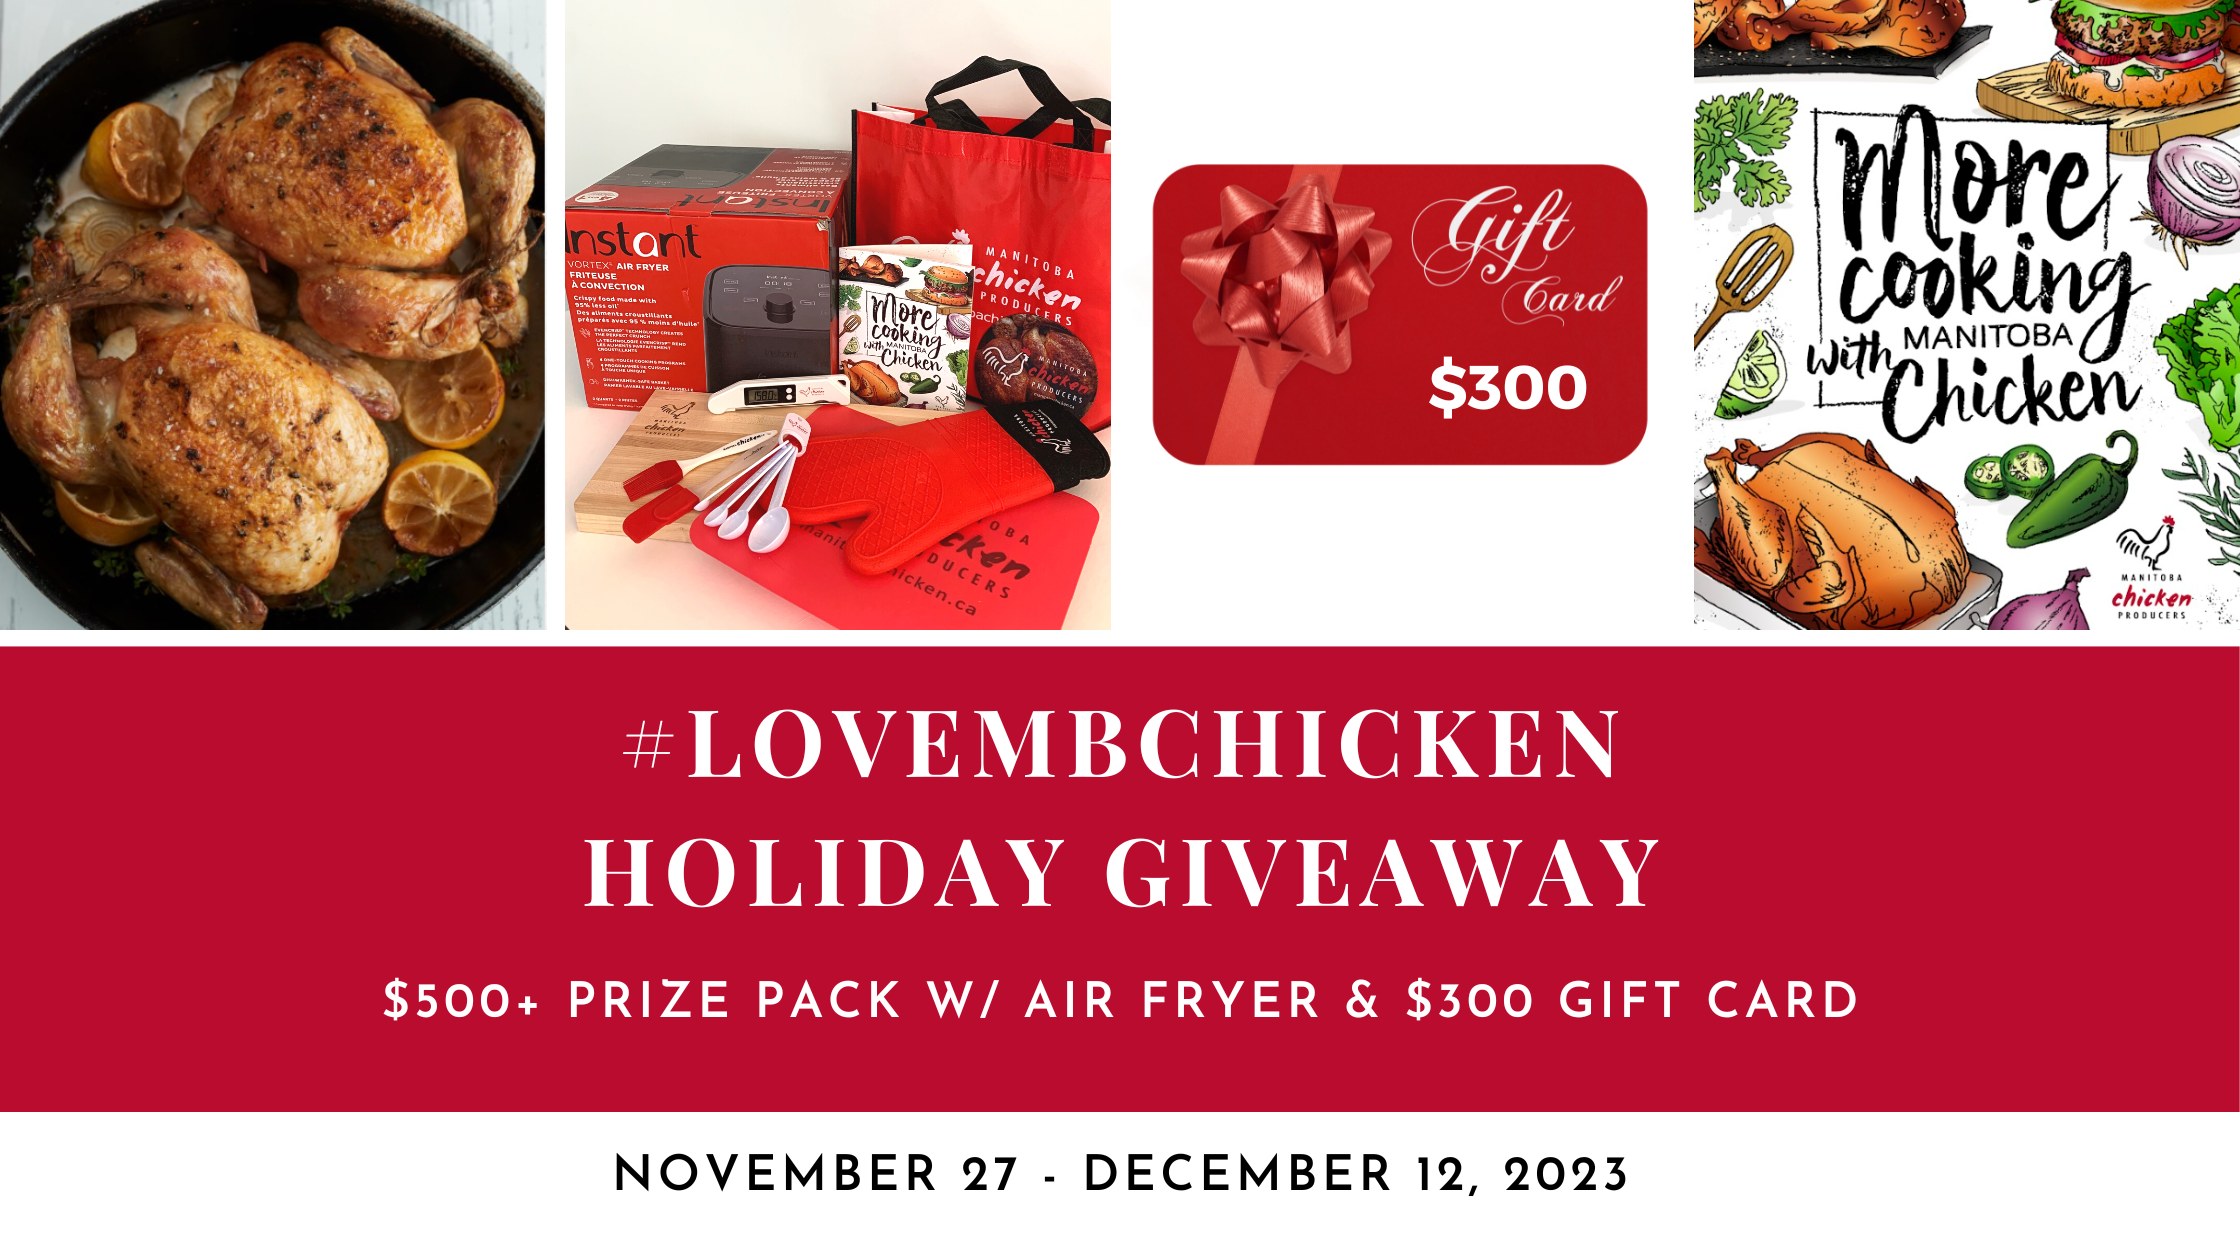 #lovembchicken holiday giveaway